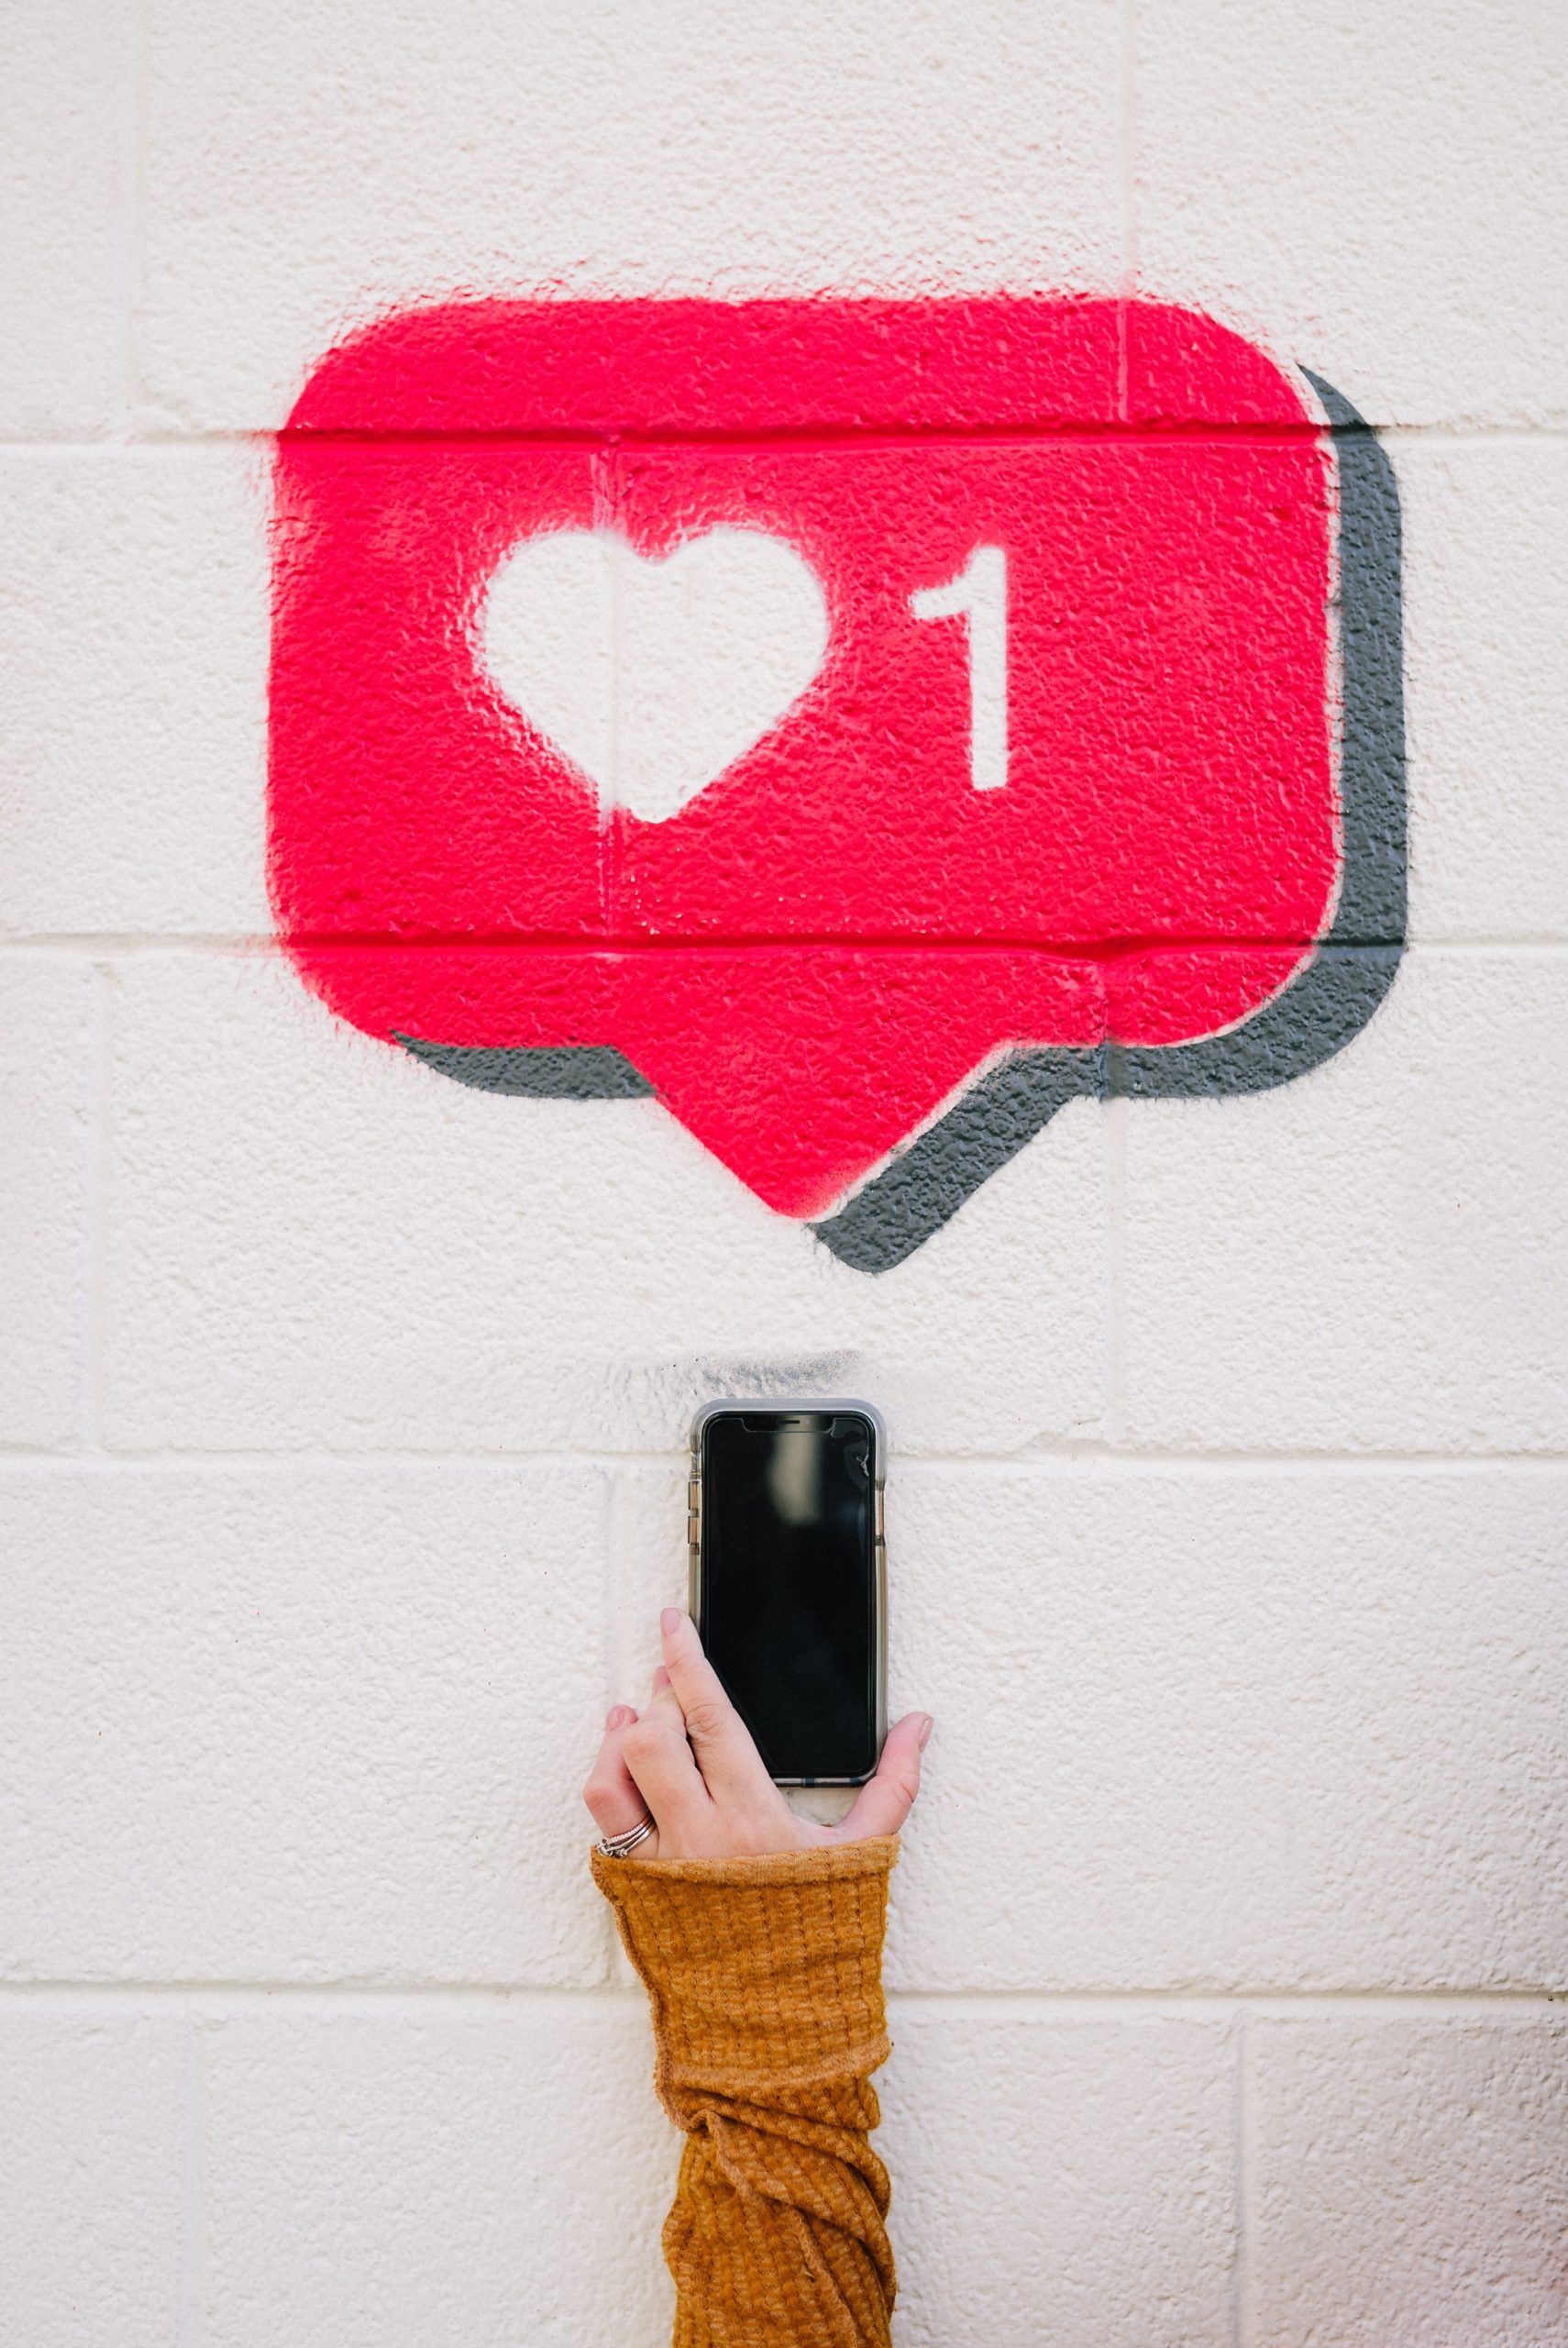 Hand holding cell phone with wall art that shows an Instagram like